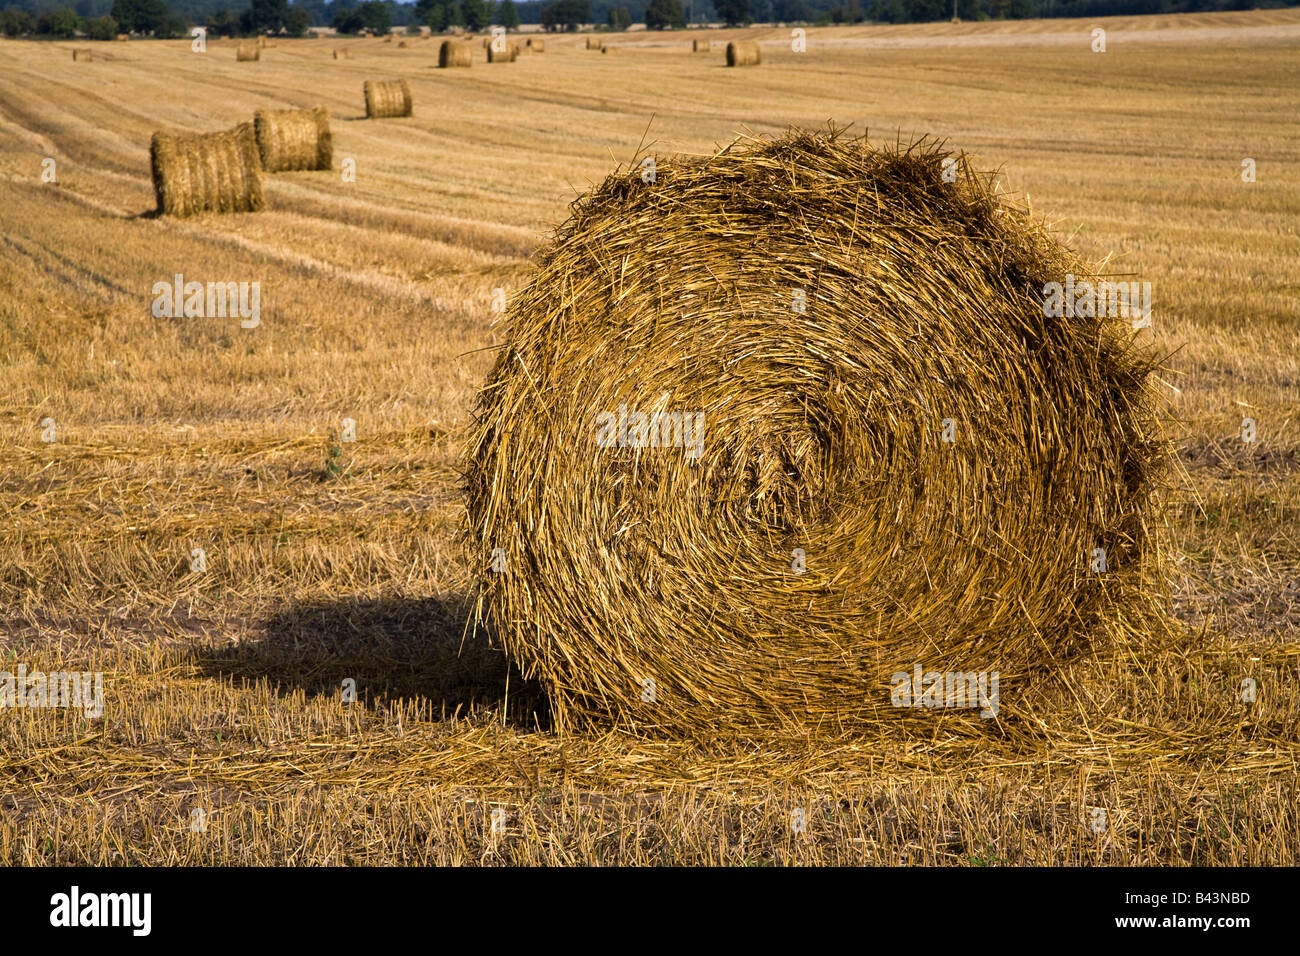 Hay bale in mown field Poland Stock Photo